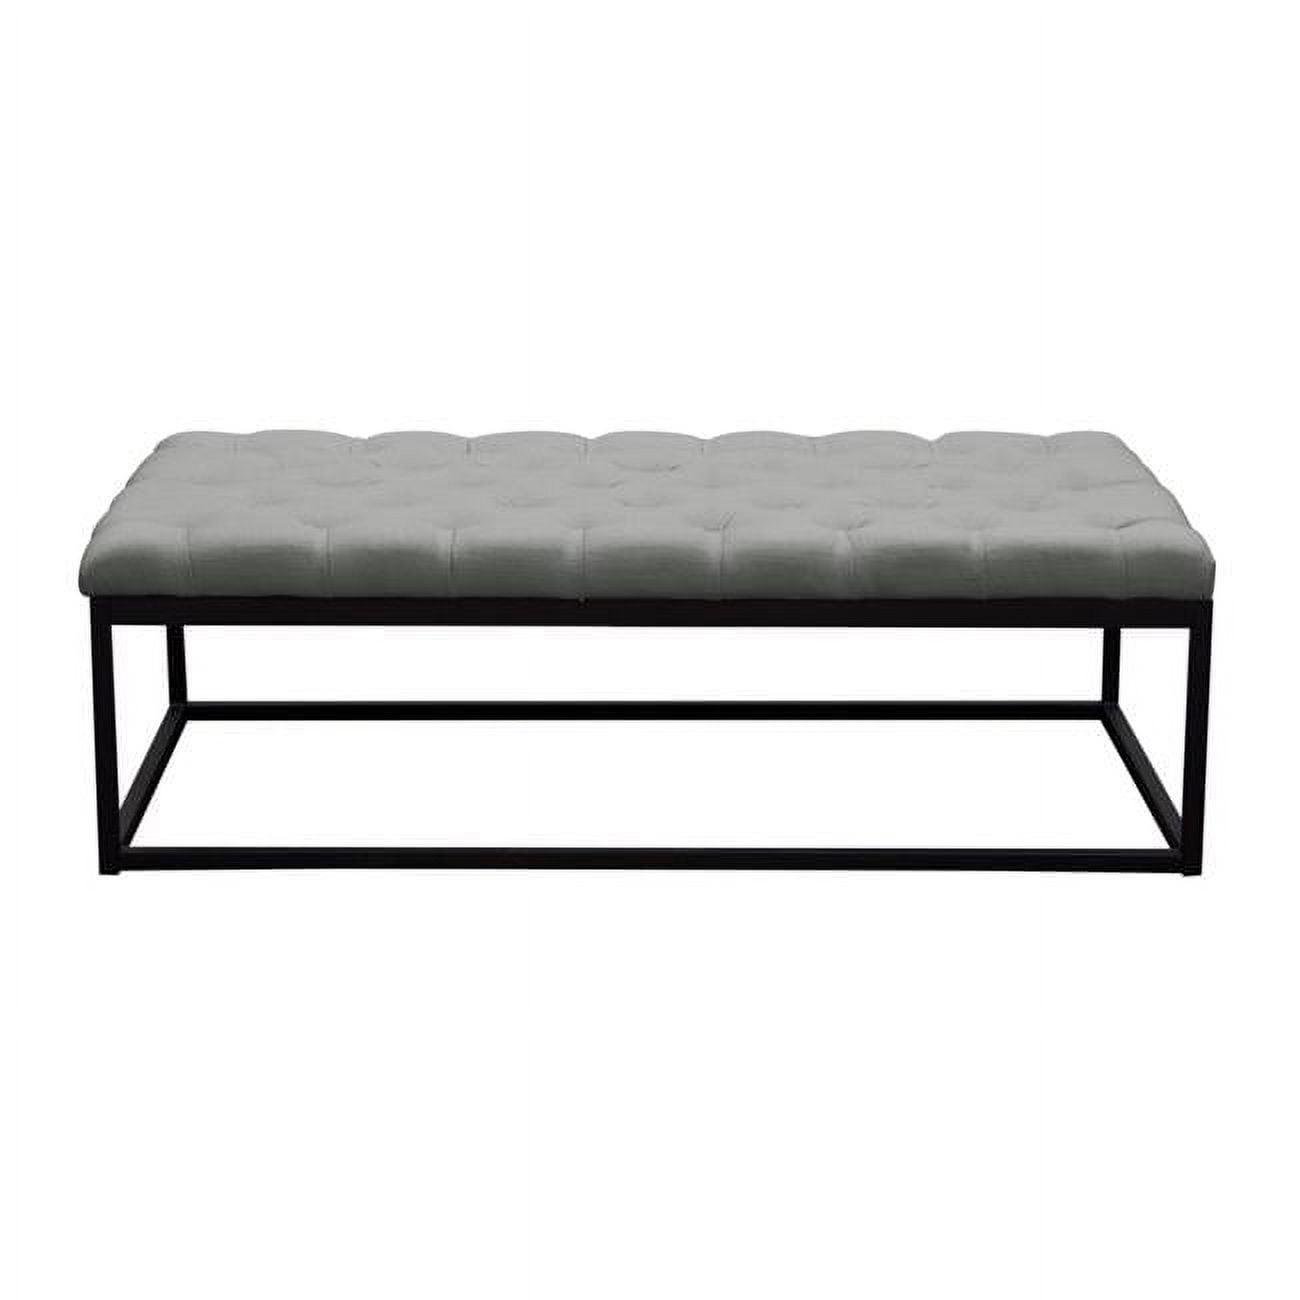 Large Contemporary Green Fabric Tufted Bench on Black Metal Base